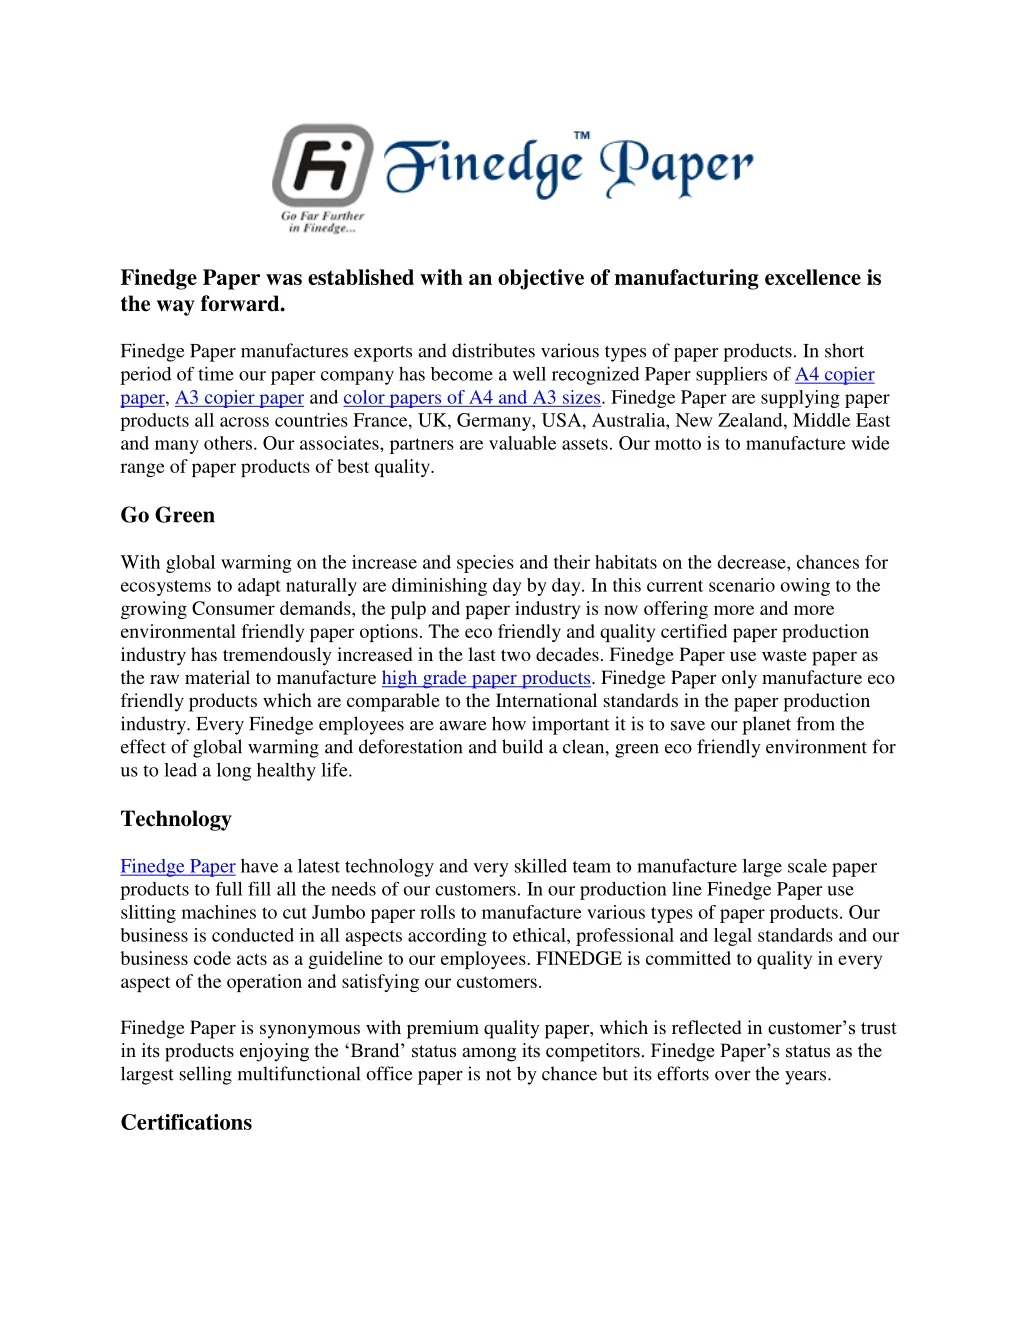 finedge paper was established with an objective